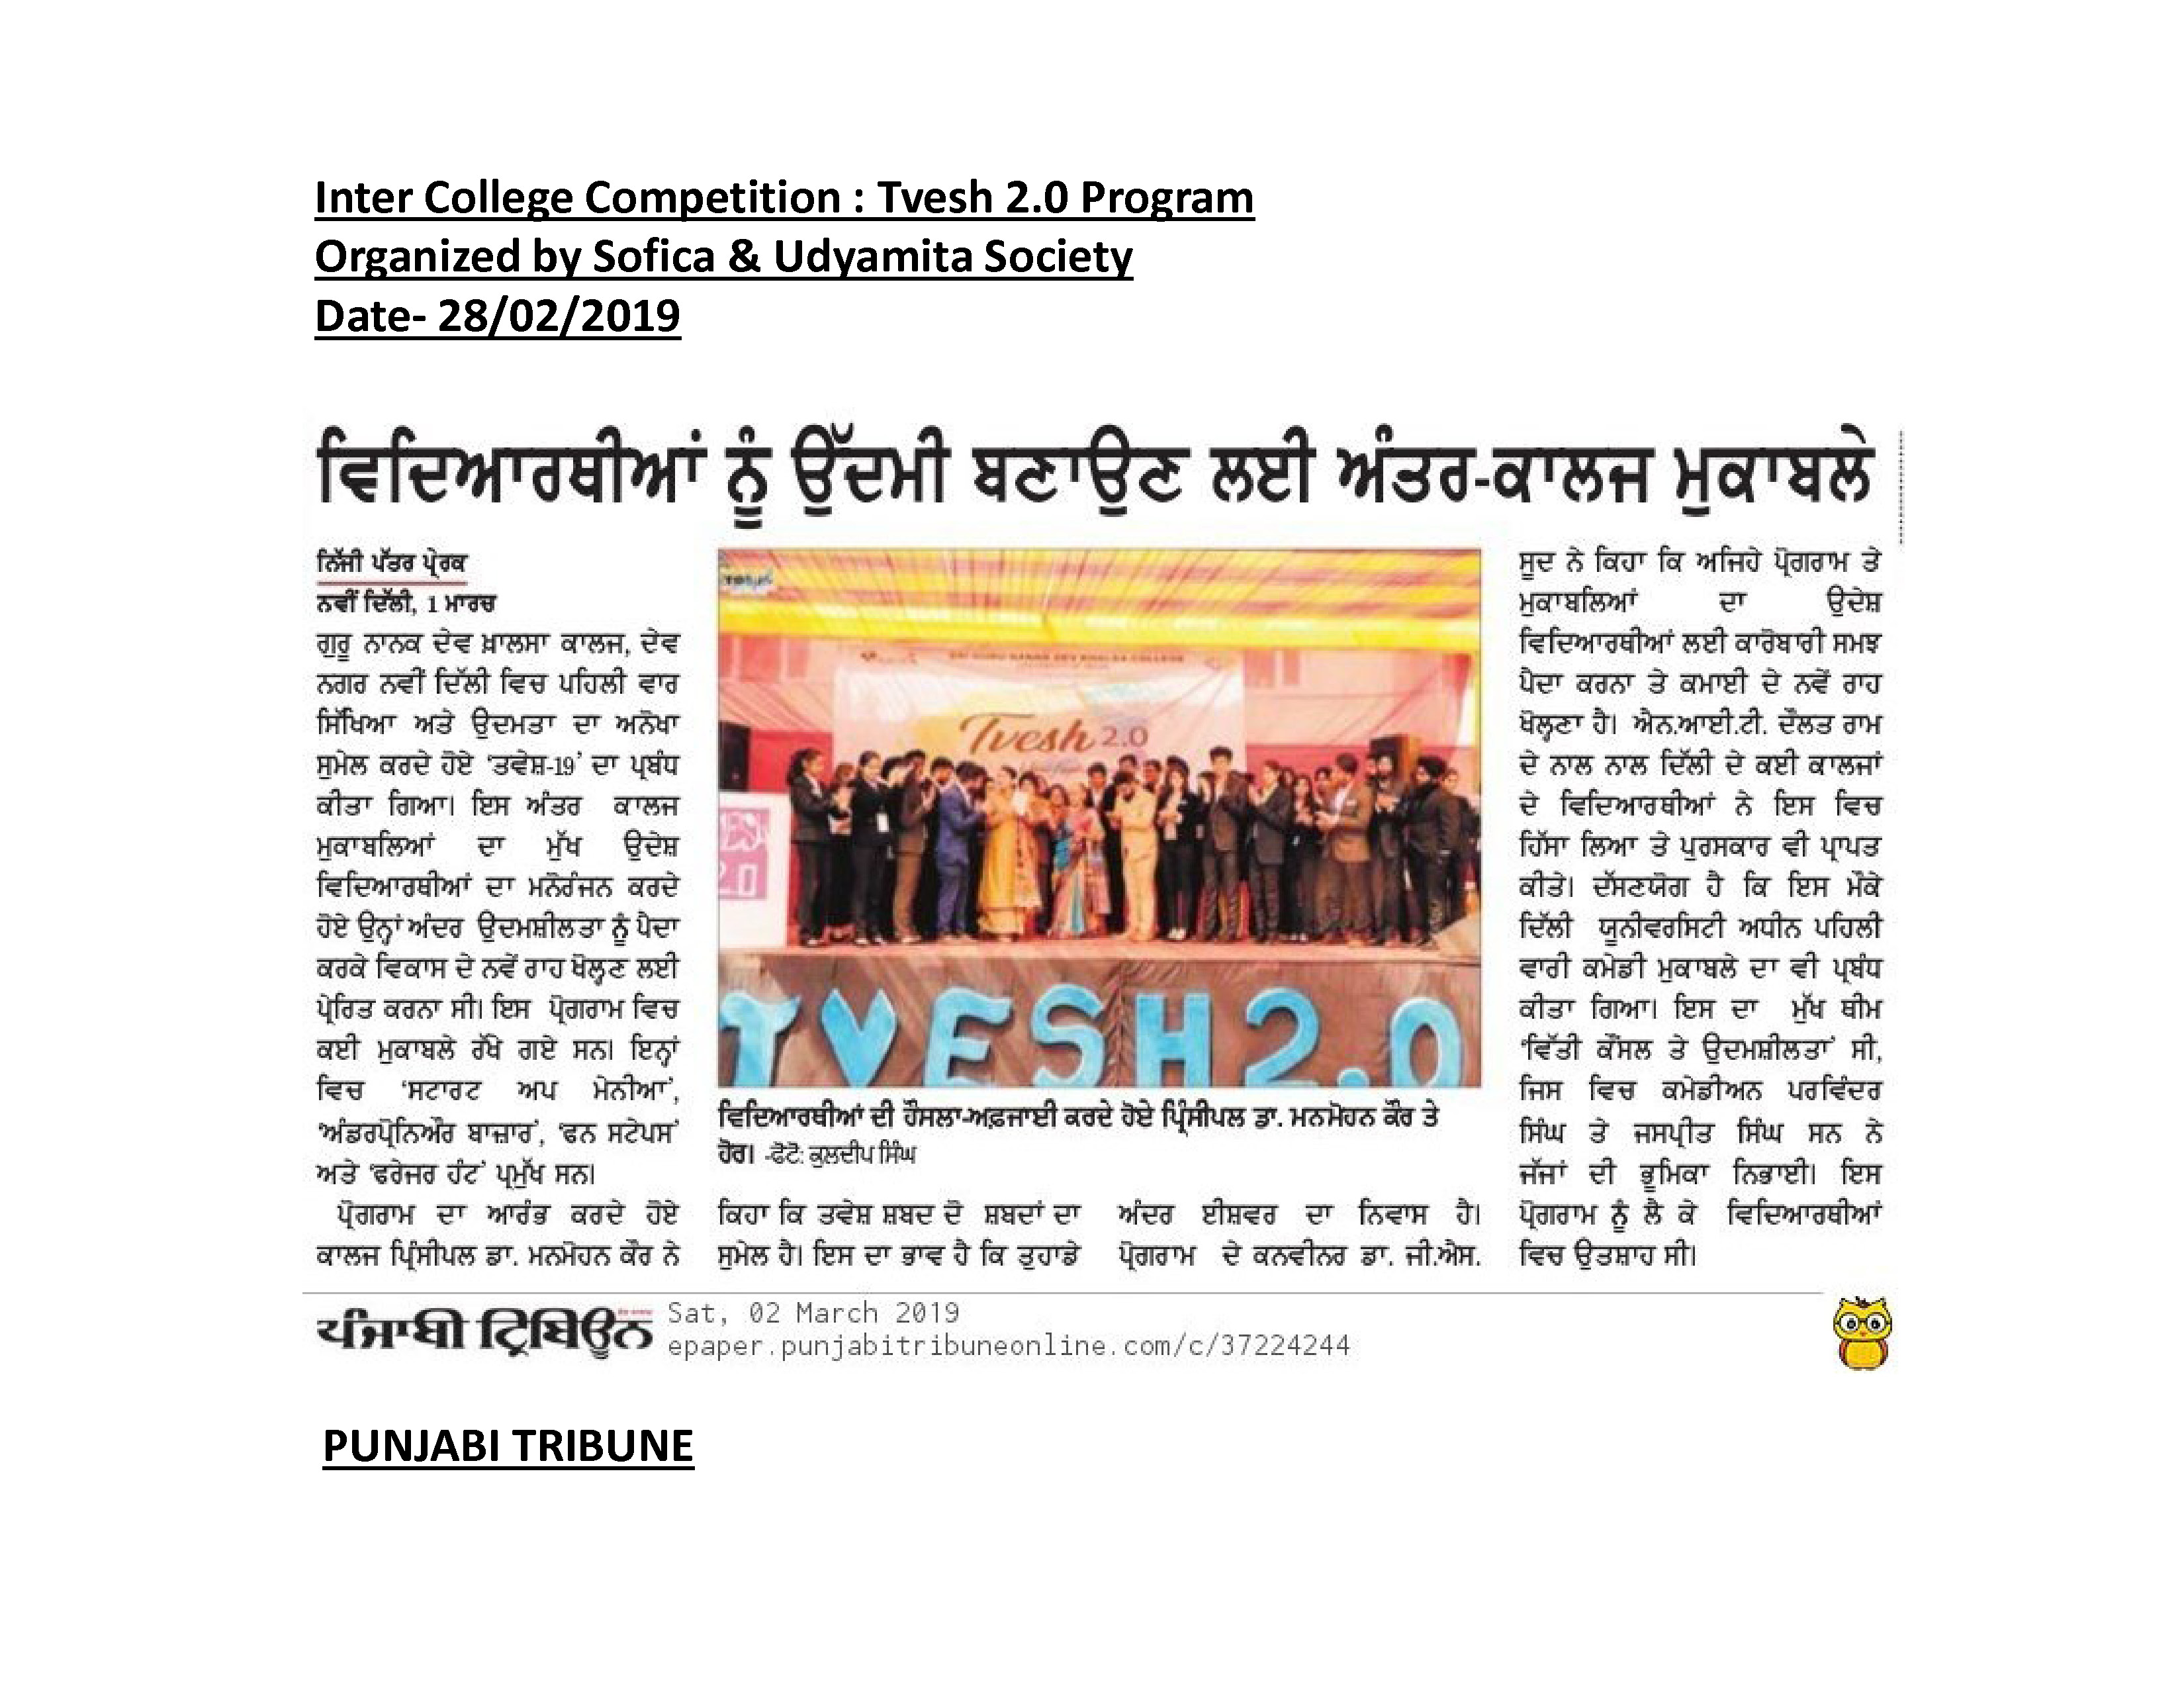 images/mediaspeaks/press clipping_Page_47.jpg